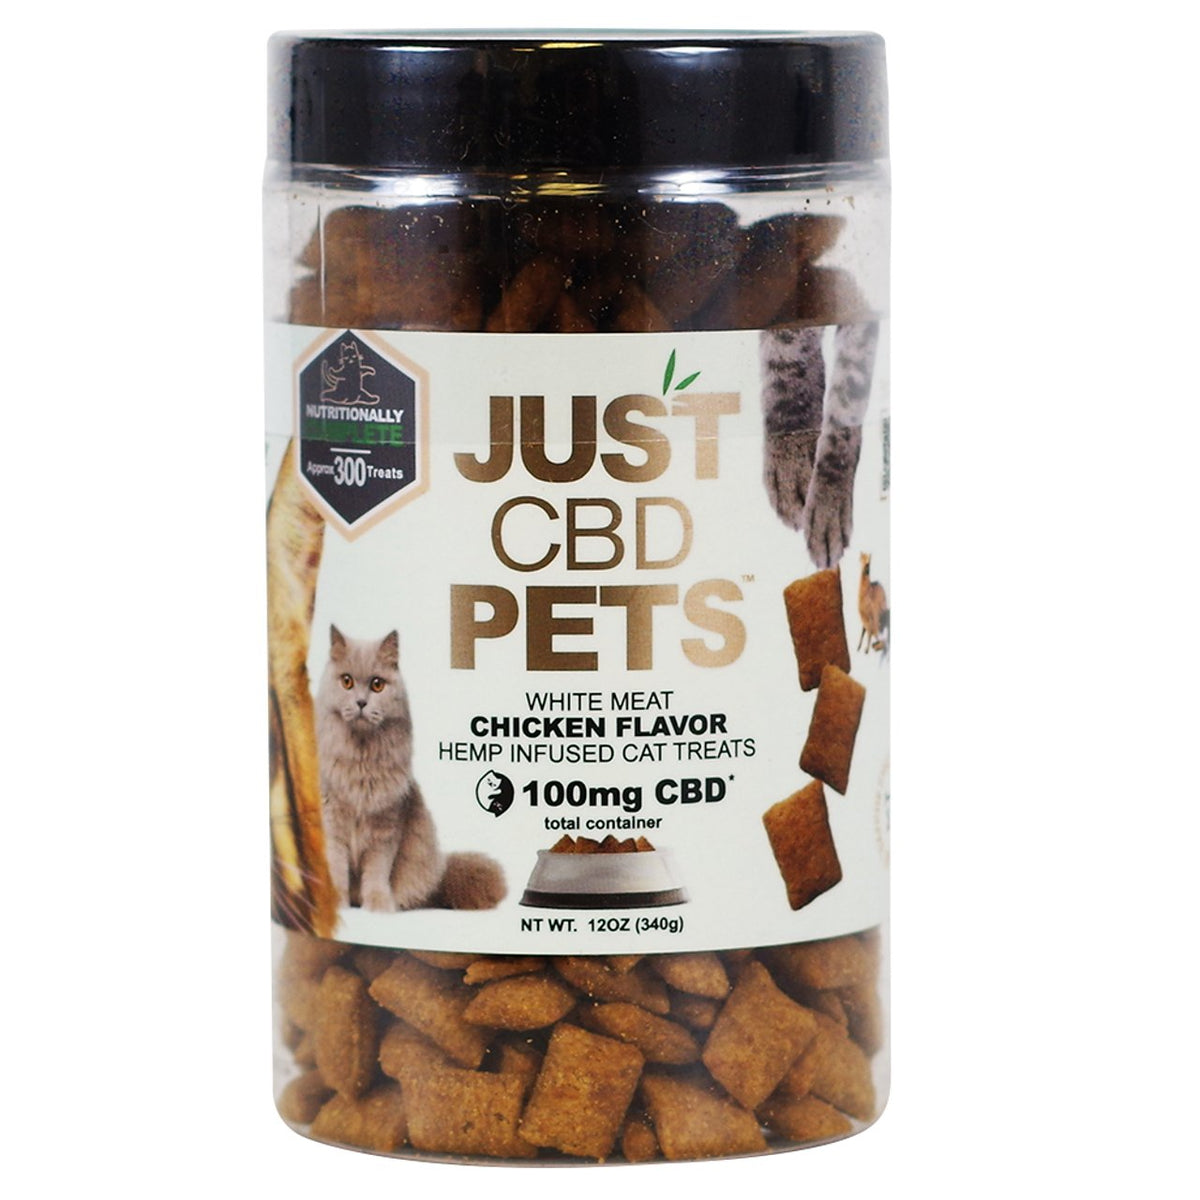 Just CBD White Meat Chicken Flavor Cat Treats 100mg - Supply Natural